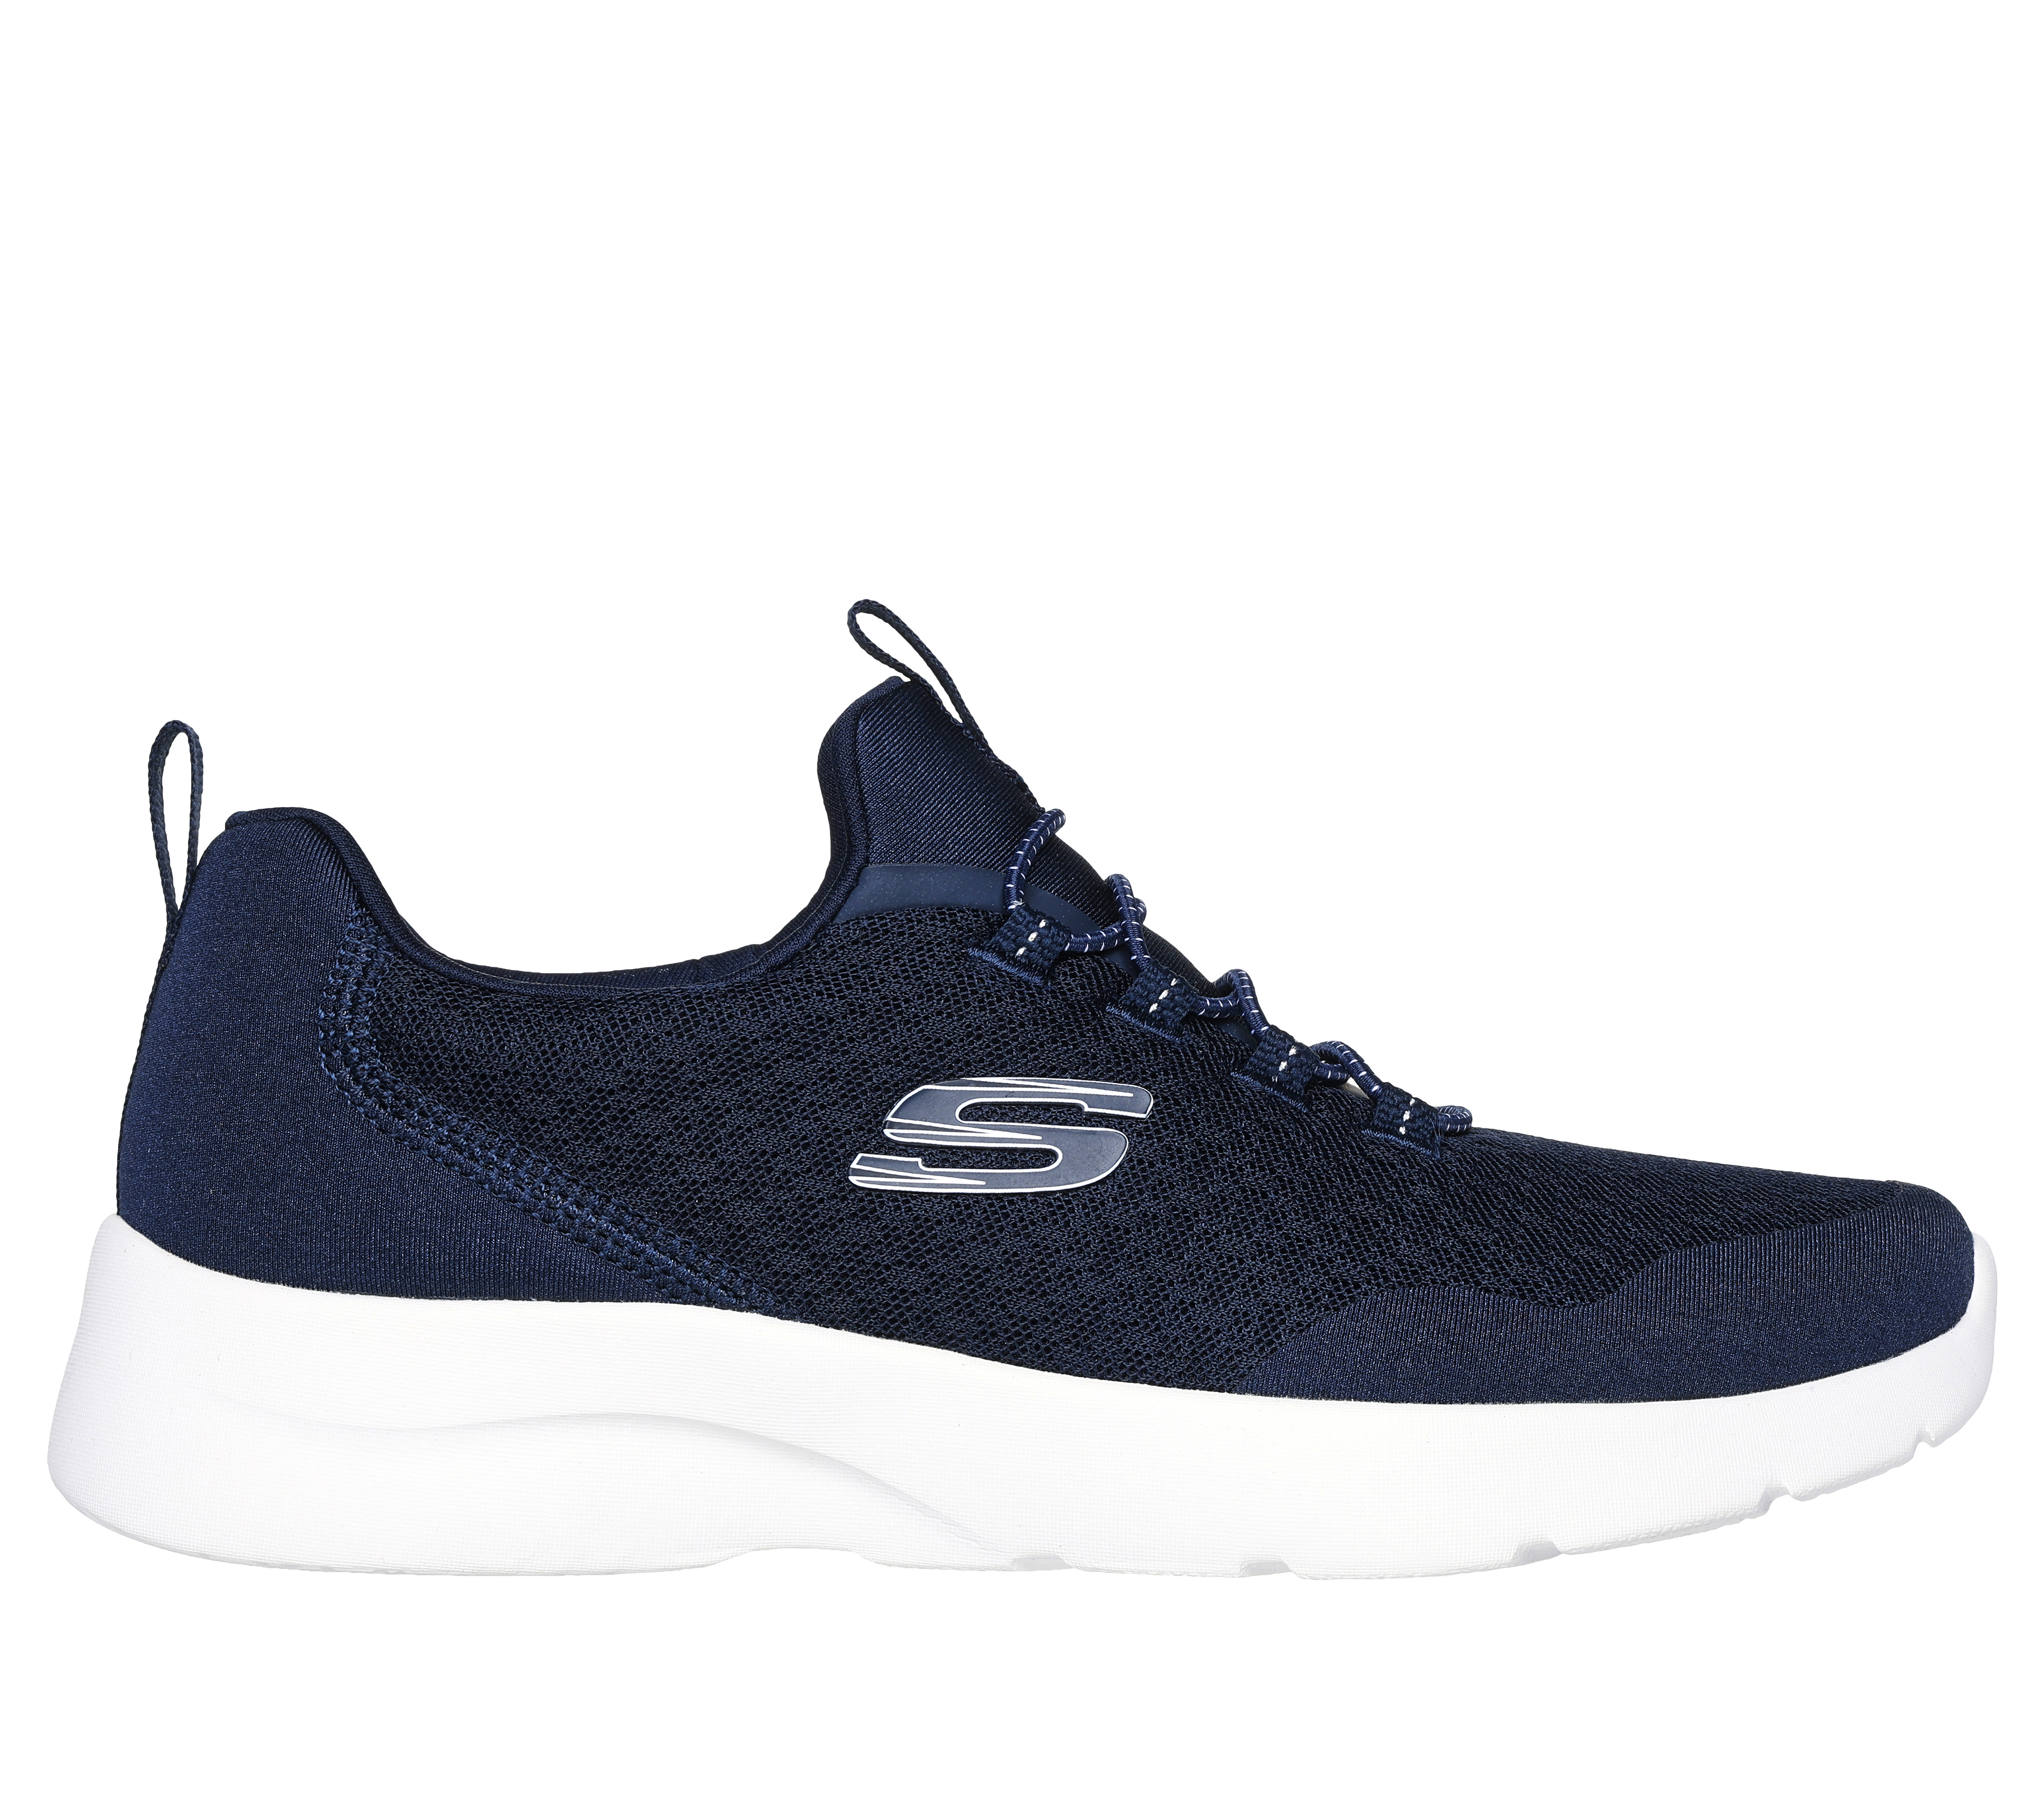 2.0 - Real Smooth | SKECHERS